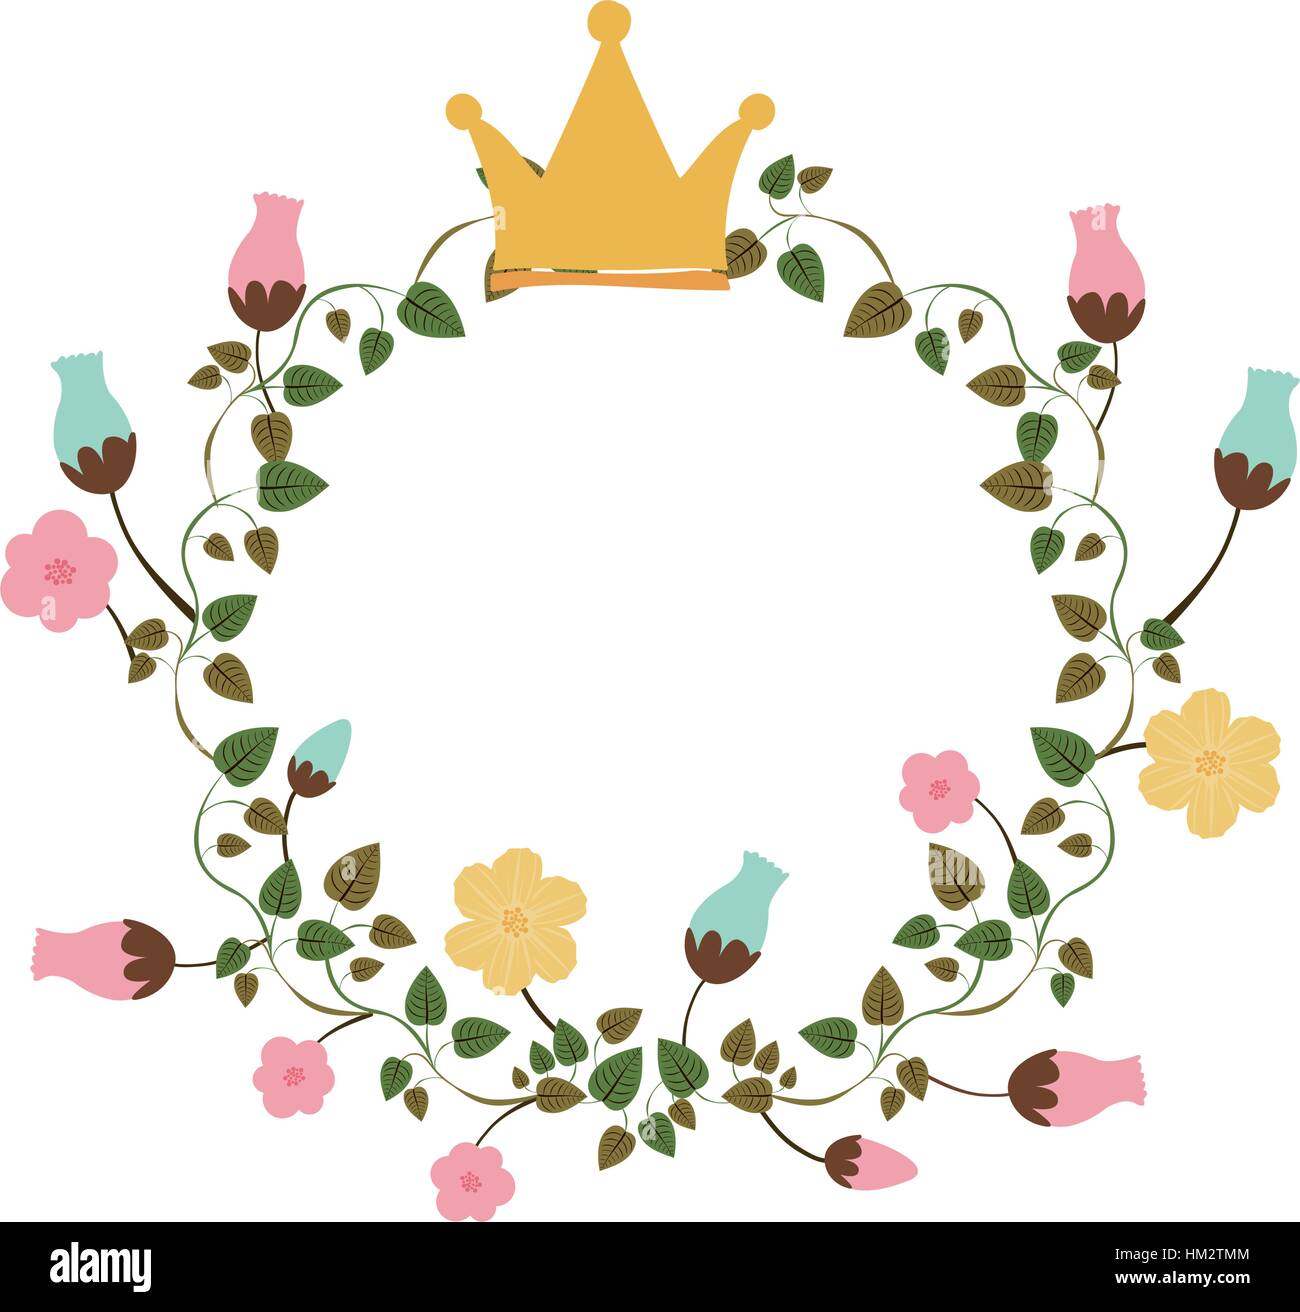 colorful ornament creepers with flowers with crown vector illustration ...